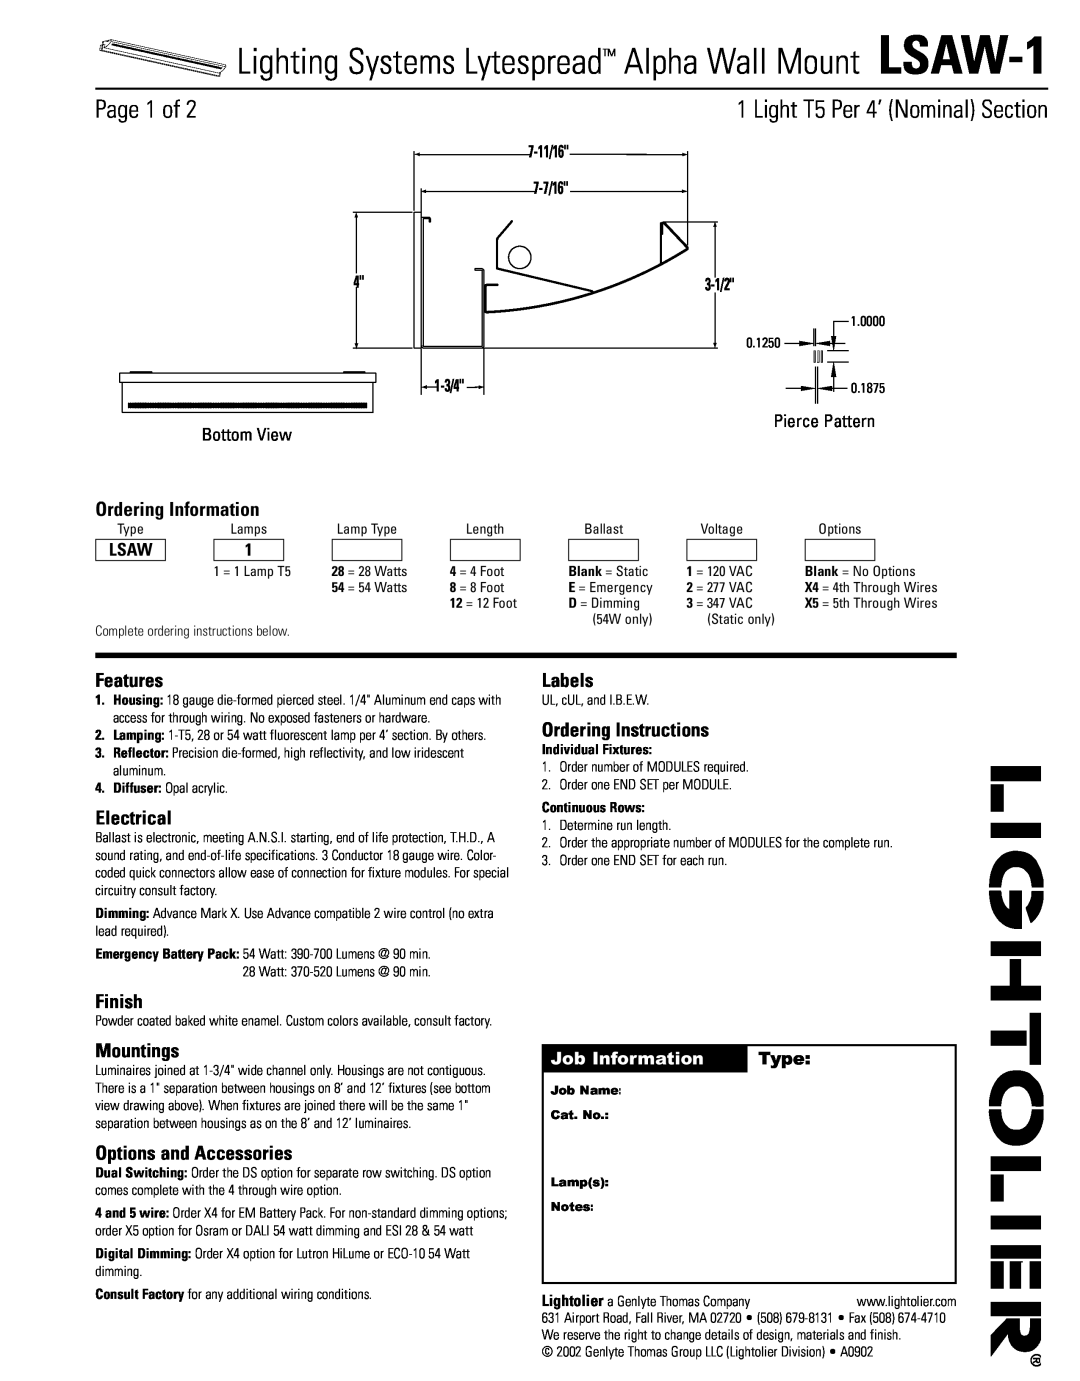 Lightolier LSAW-1 specifications Page 1 of, Light T5 Per 4’ Nominal Section, Ordering Information, Features, Electrical 